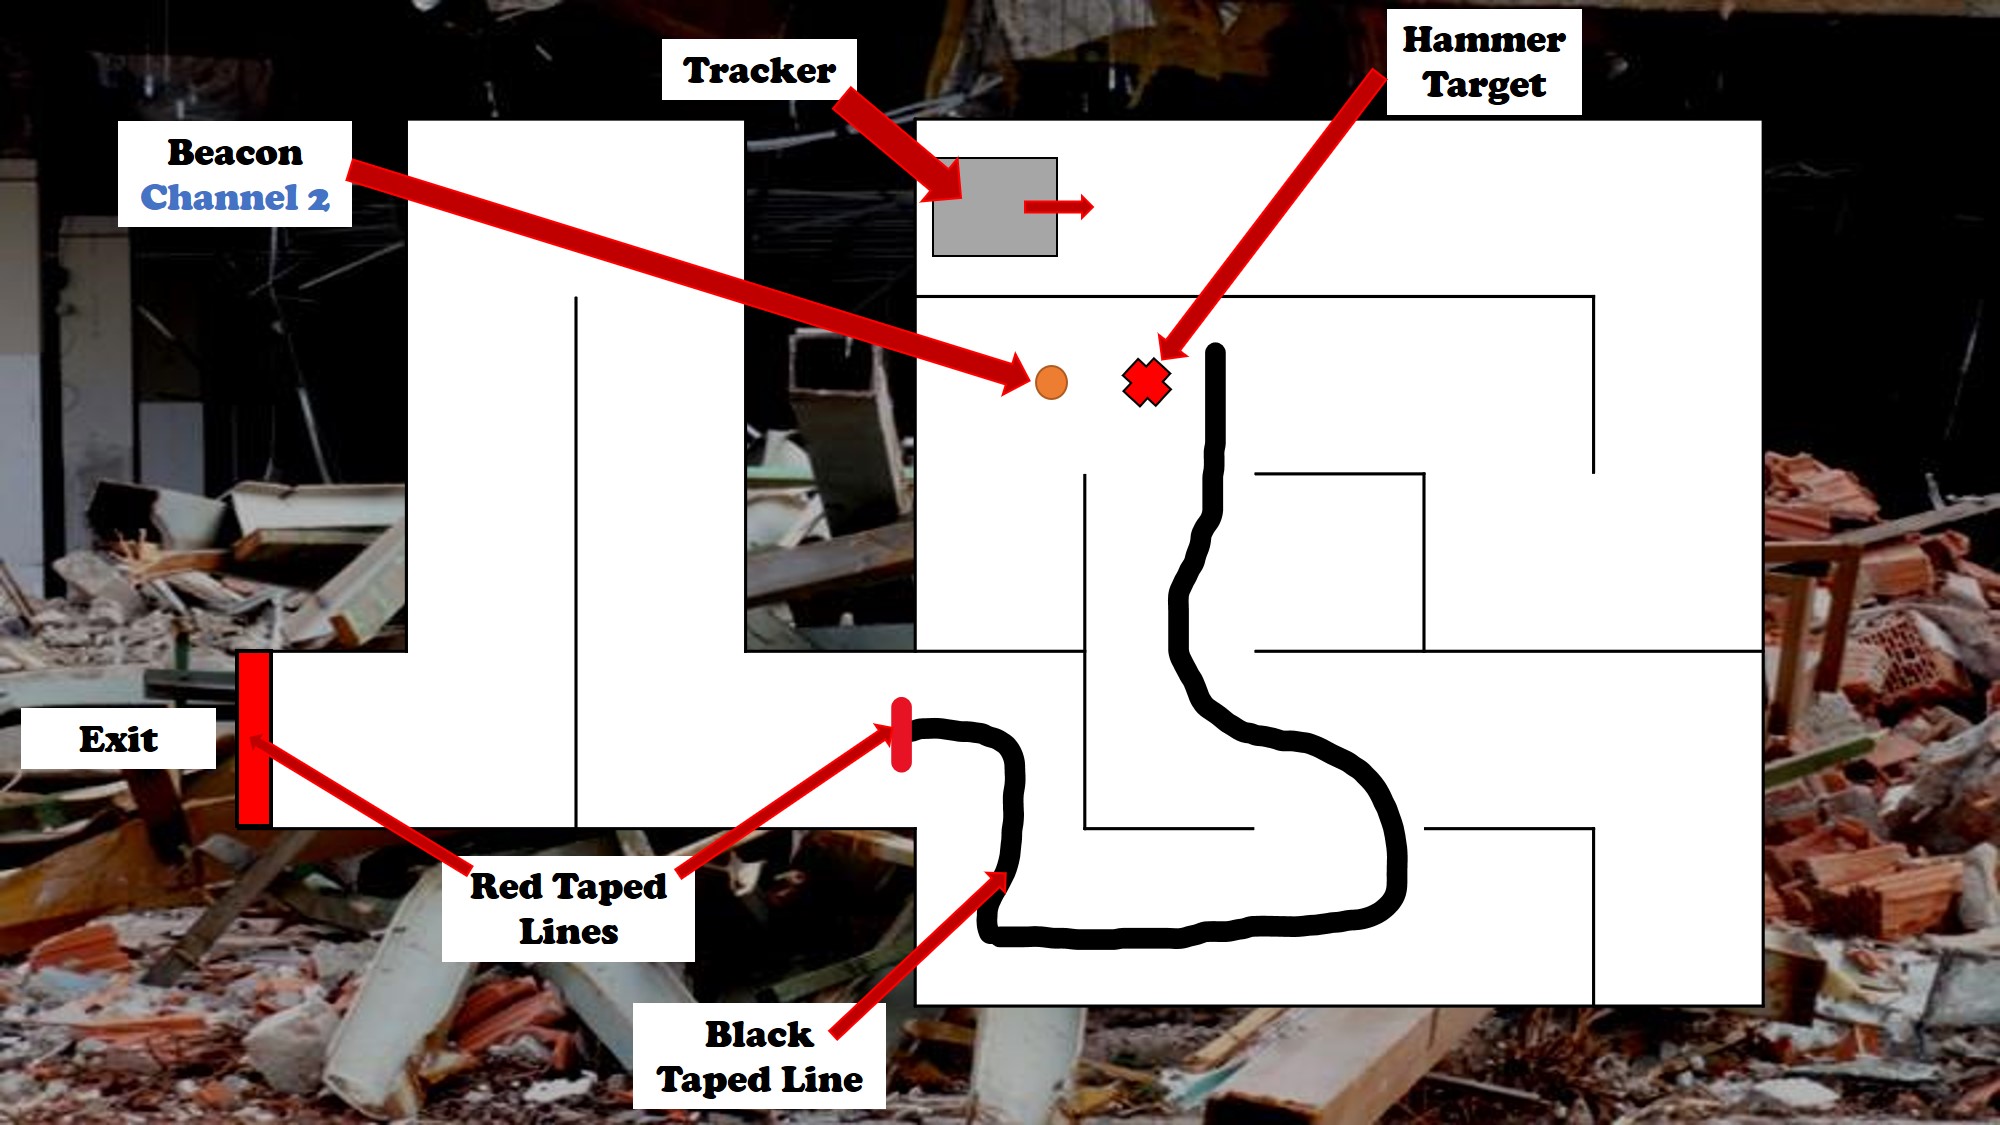 The tape line has been extended and then terminates with the red line at the start of a corridor with right-angled corners in both directions before the new exit